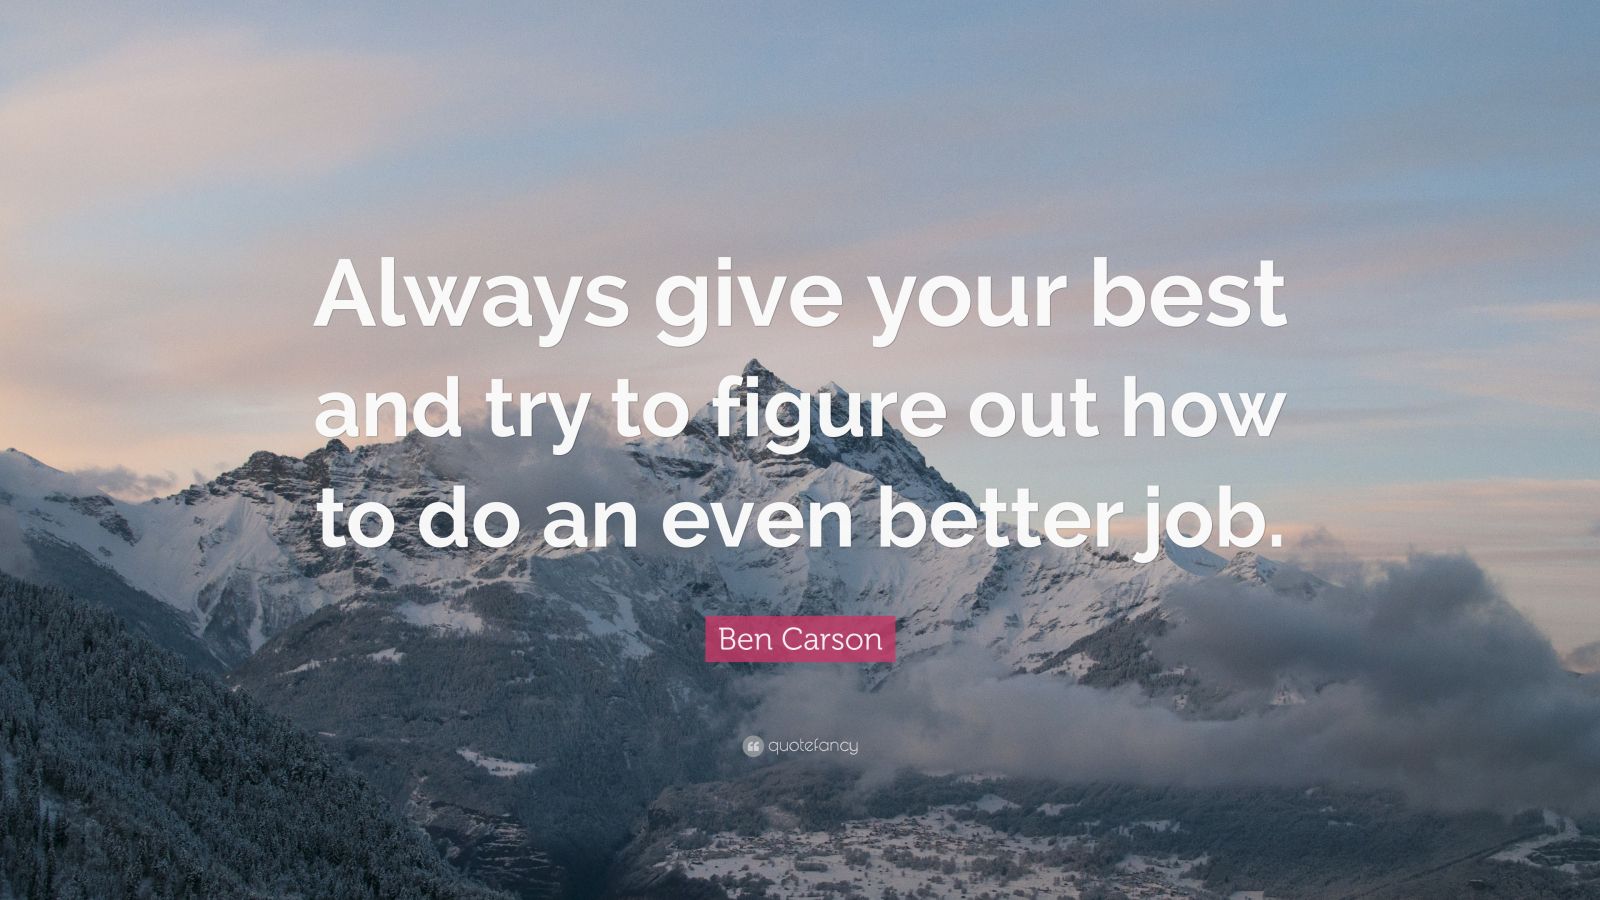 Ben Carson Quote: “Always give your best and try to figure out how to